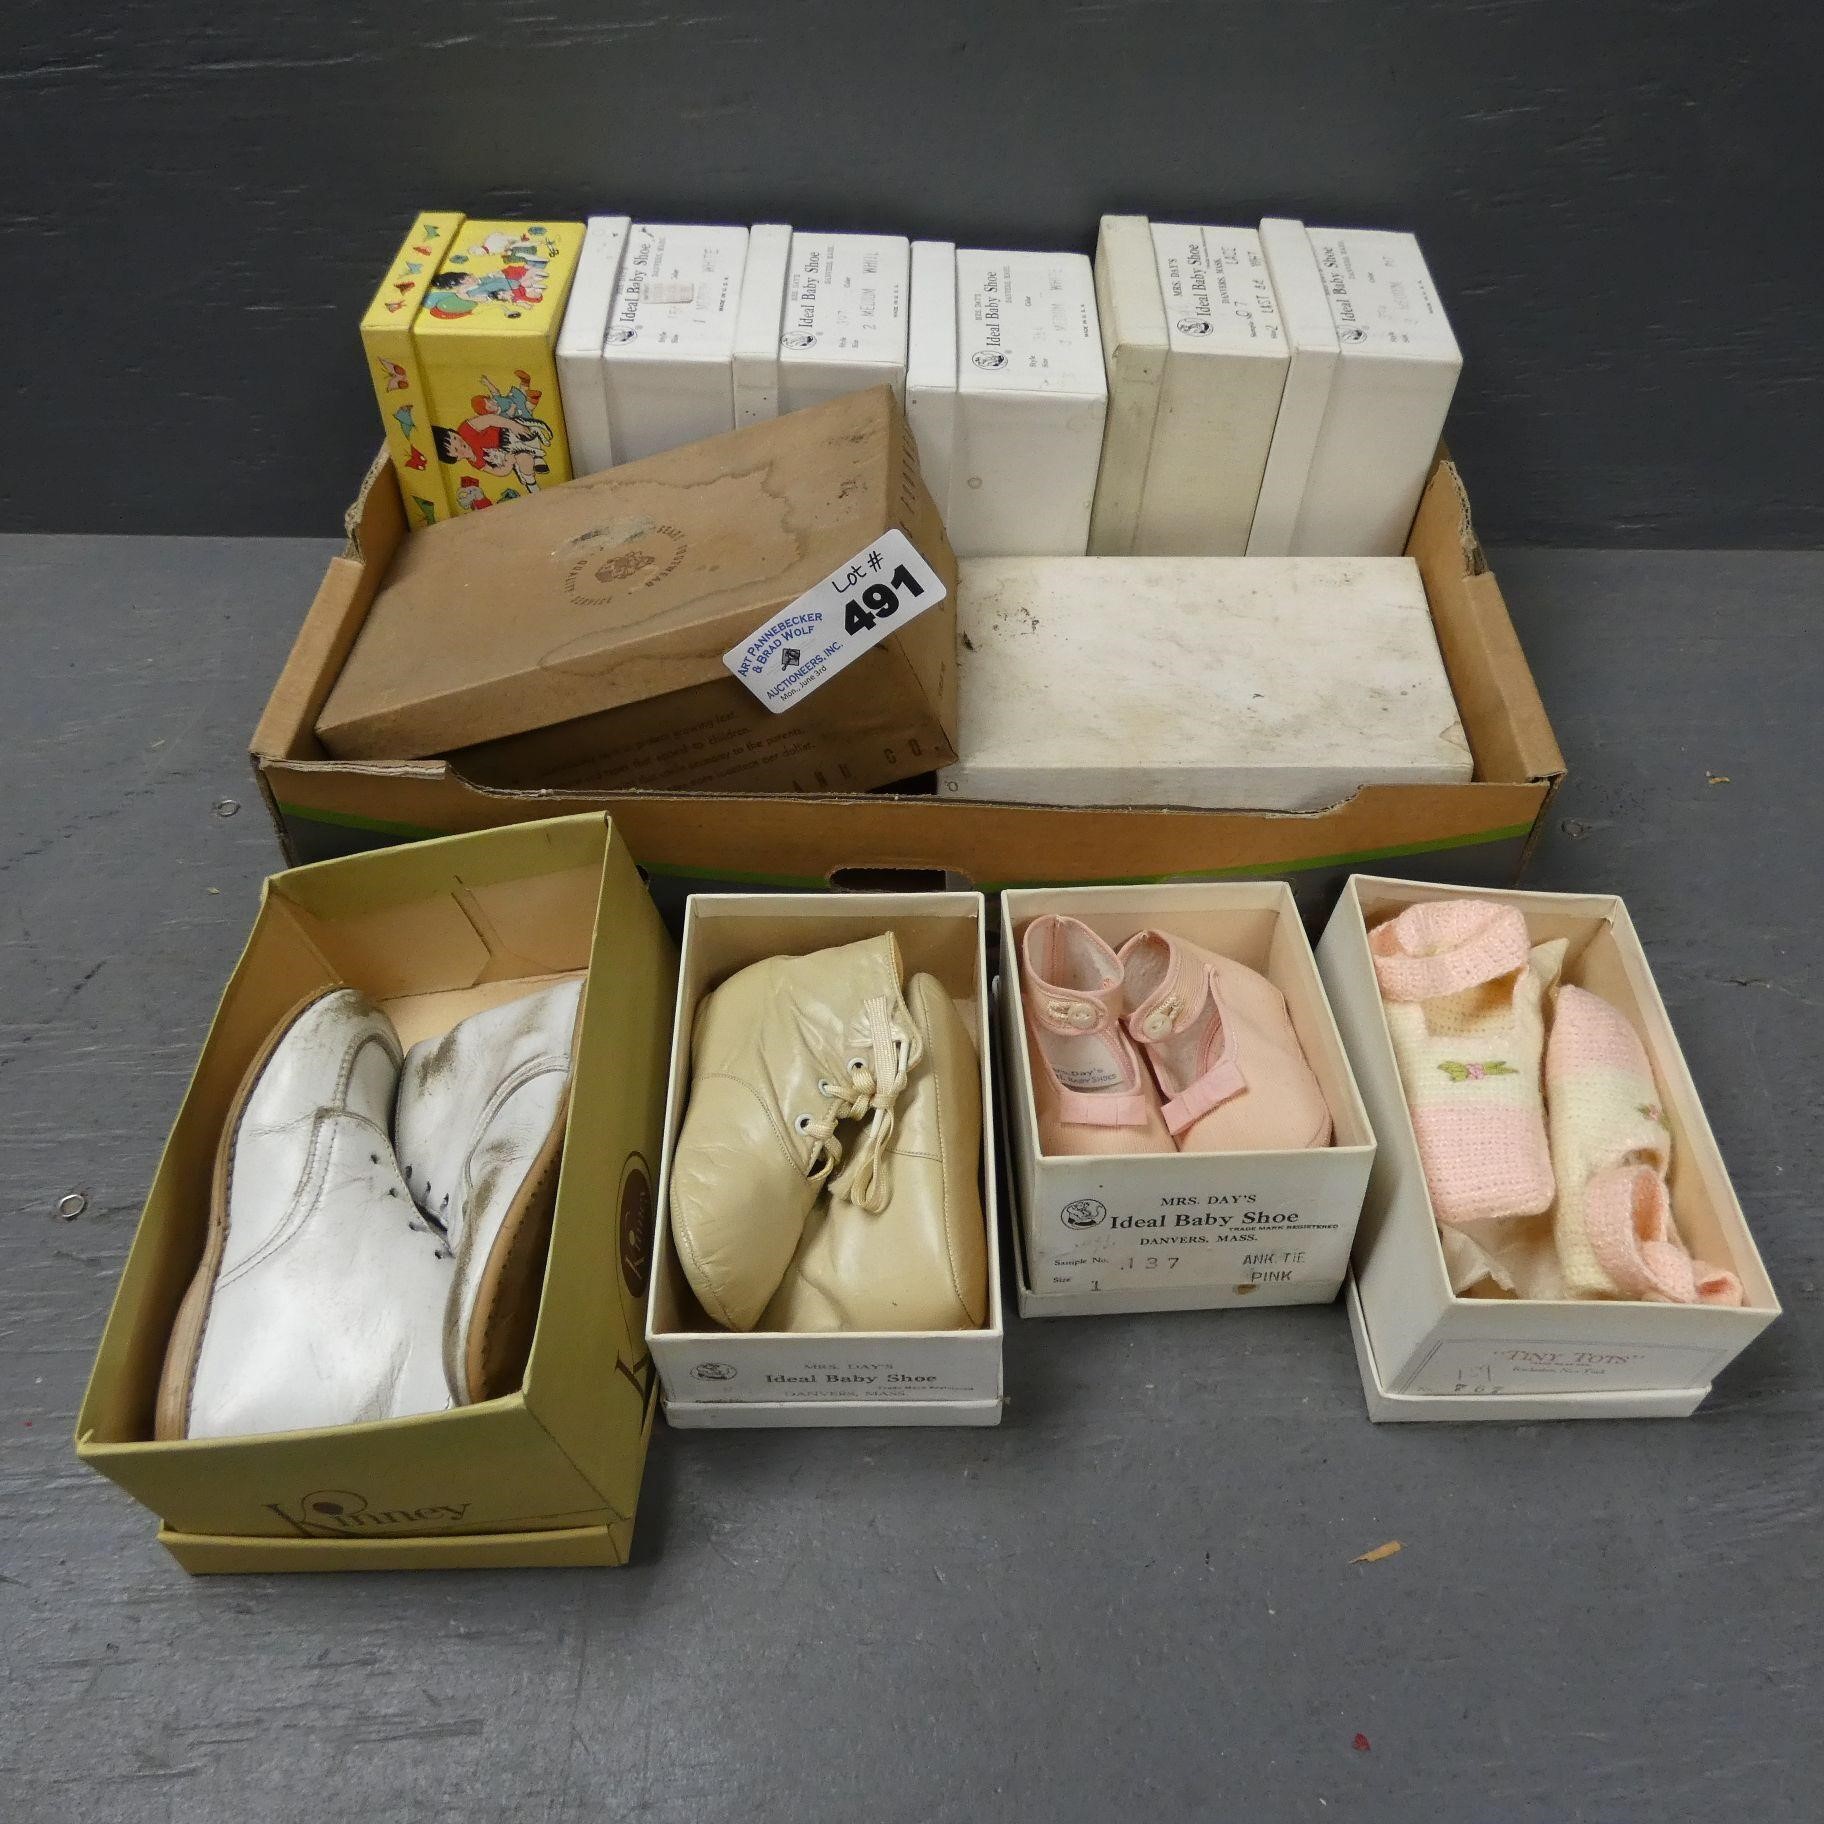 Nice Lot of Ideal Baby Shoes w/ Boxes